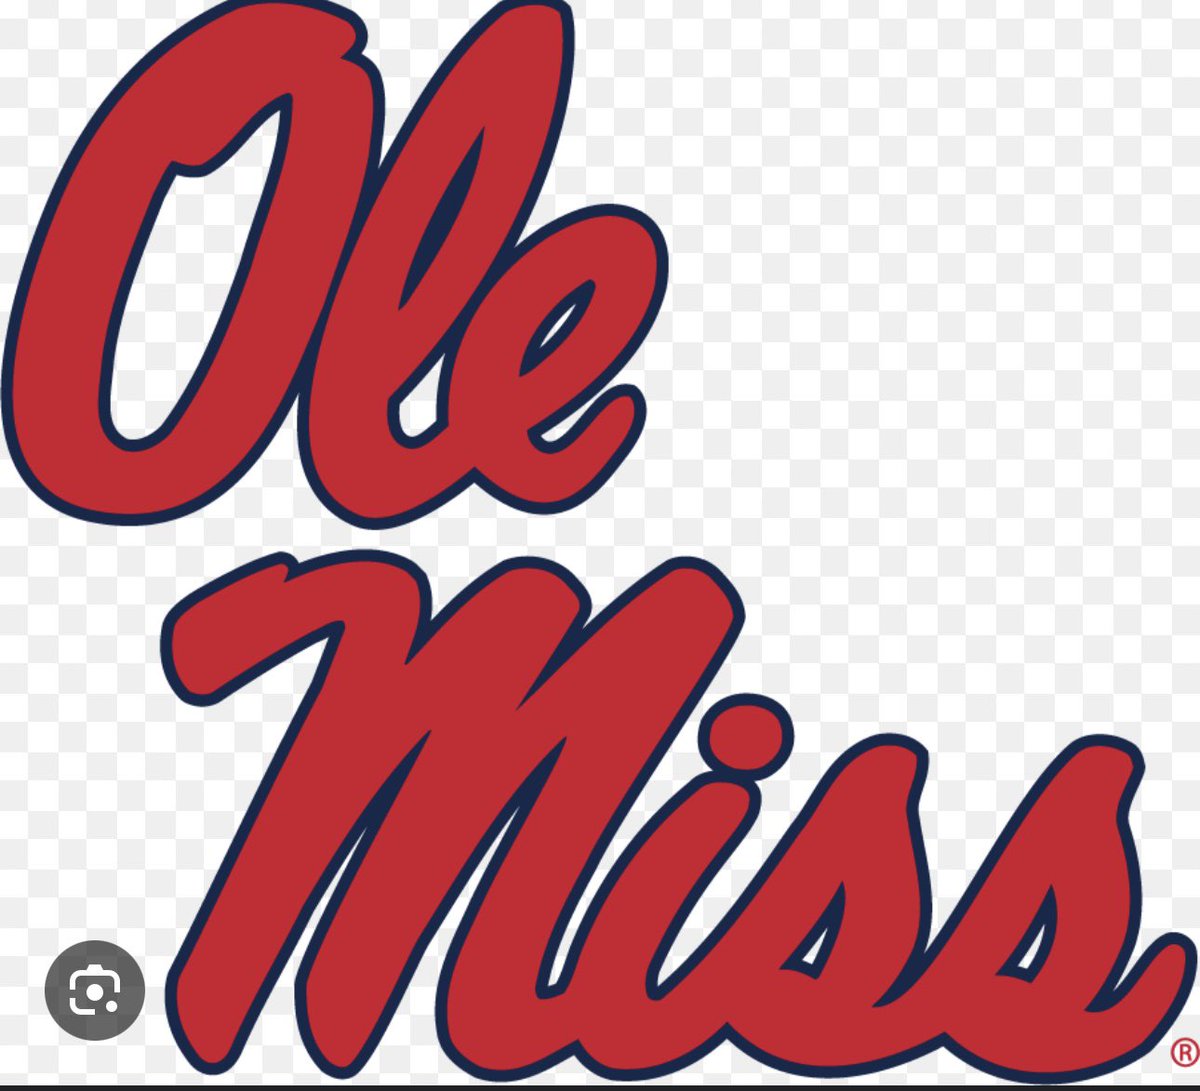 After a great spring game, I’m Beyond blessed to have received an offer from @OleMissFB #HottyTotty @ChoctawCountyFB @D_Mitchell91